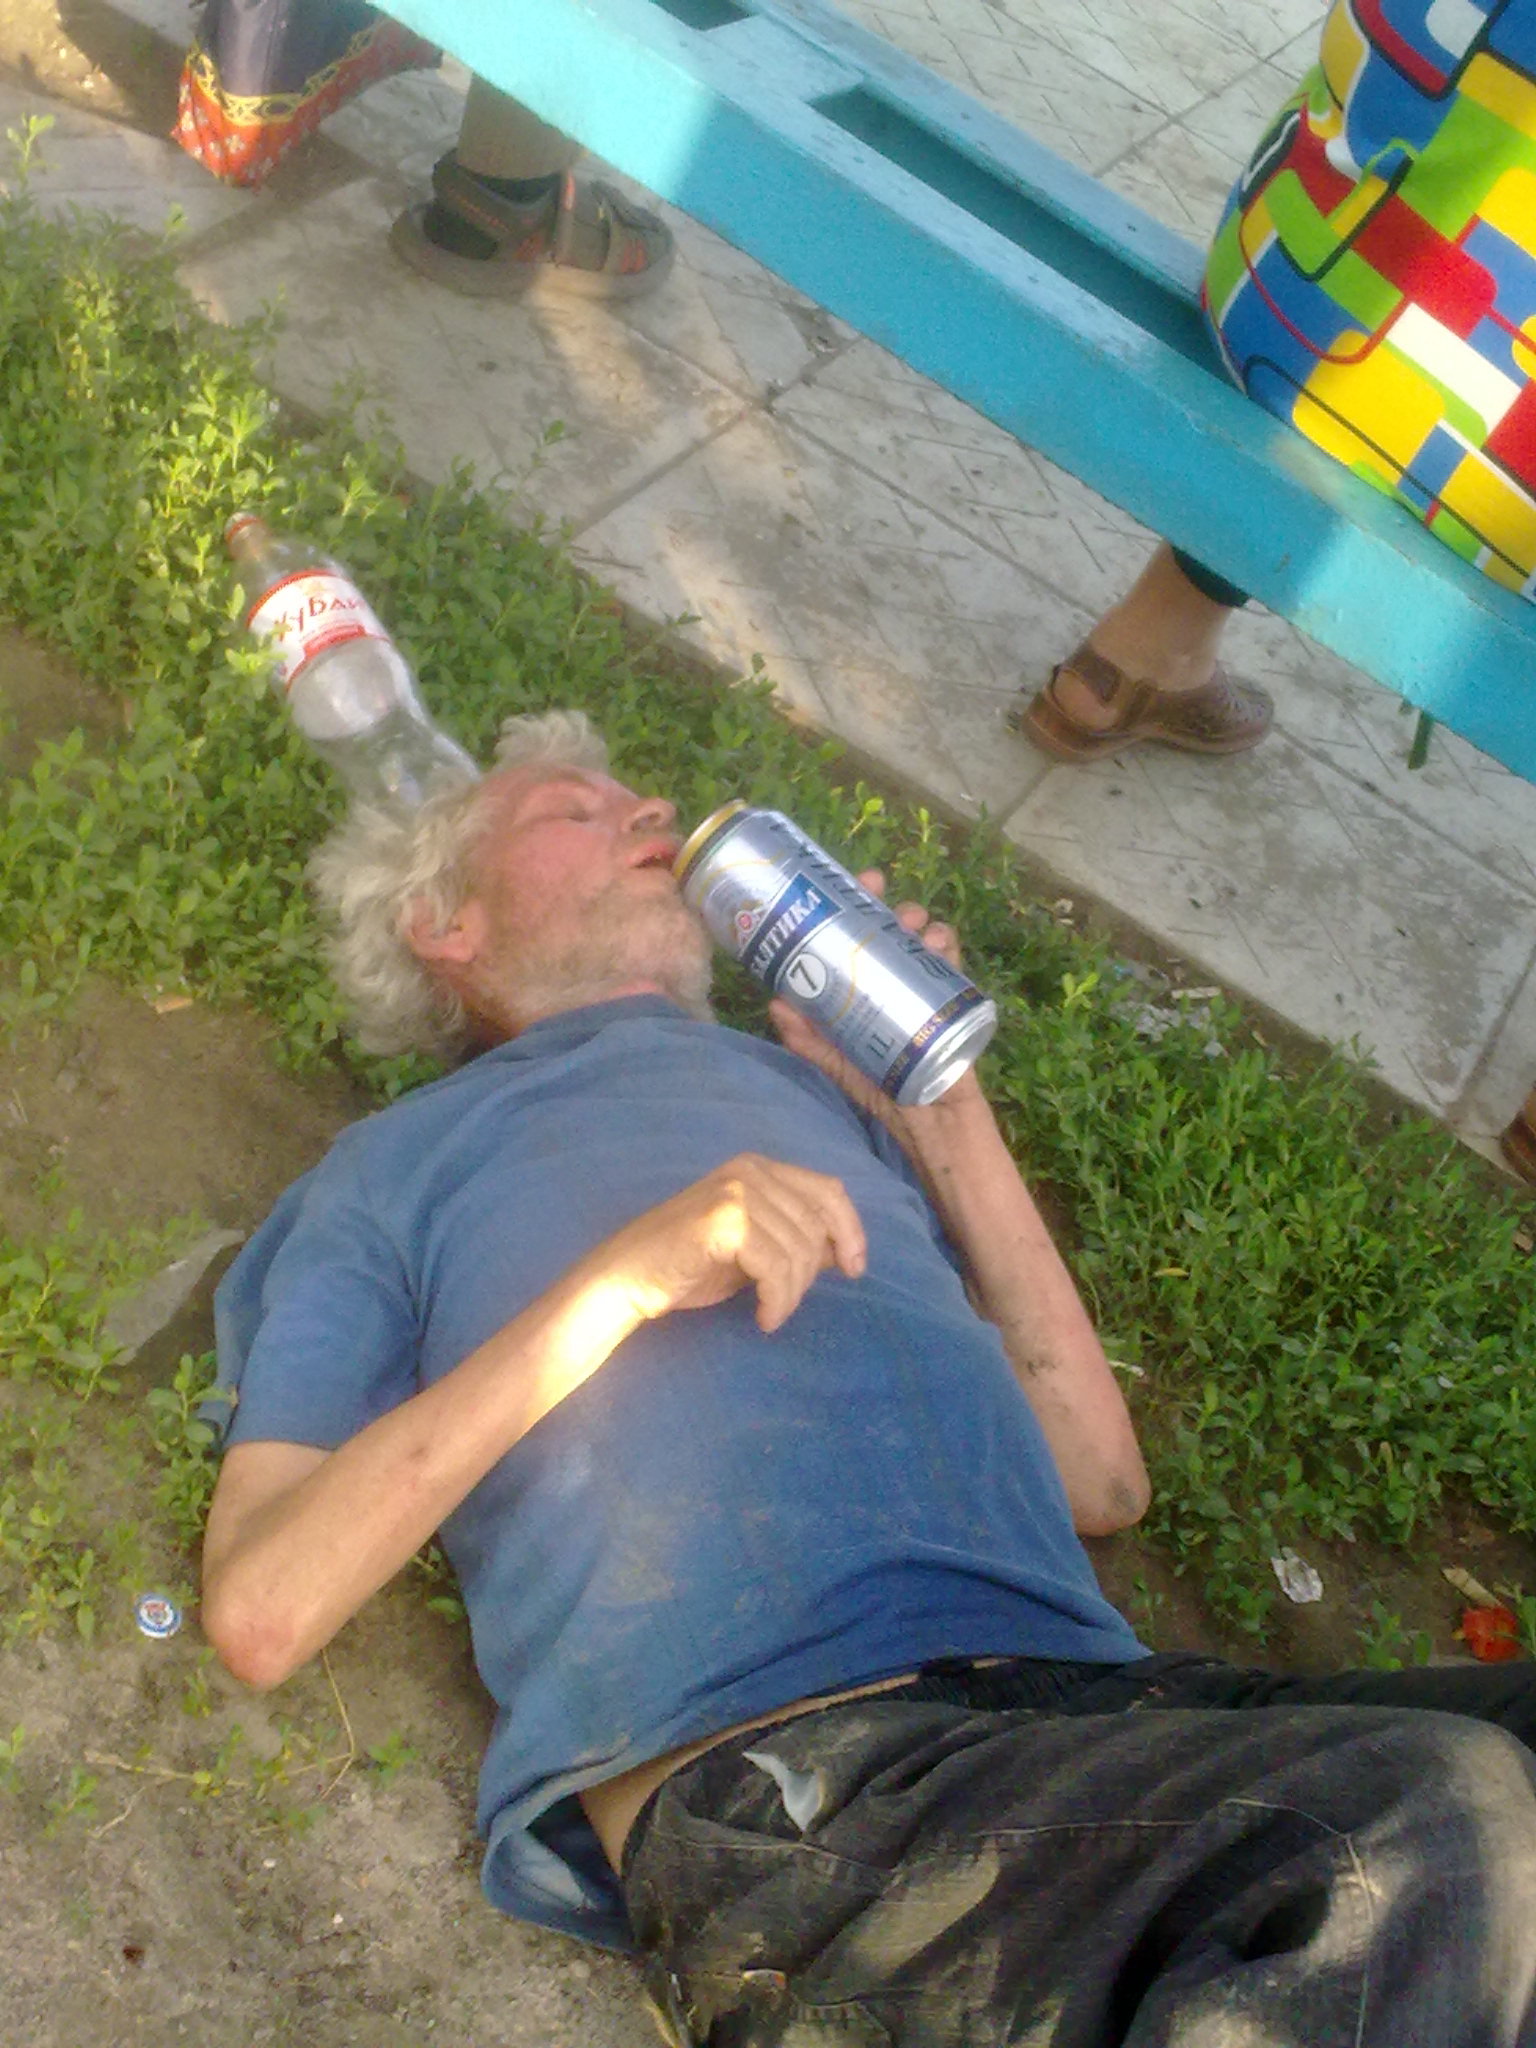 Tired. - My, Bum, Beer, The photo, Fatigue